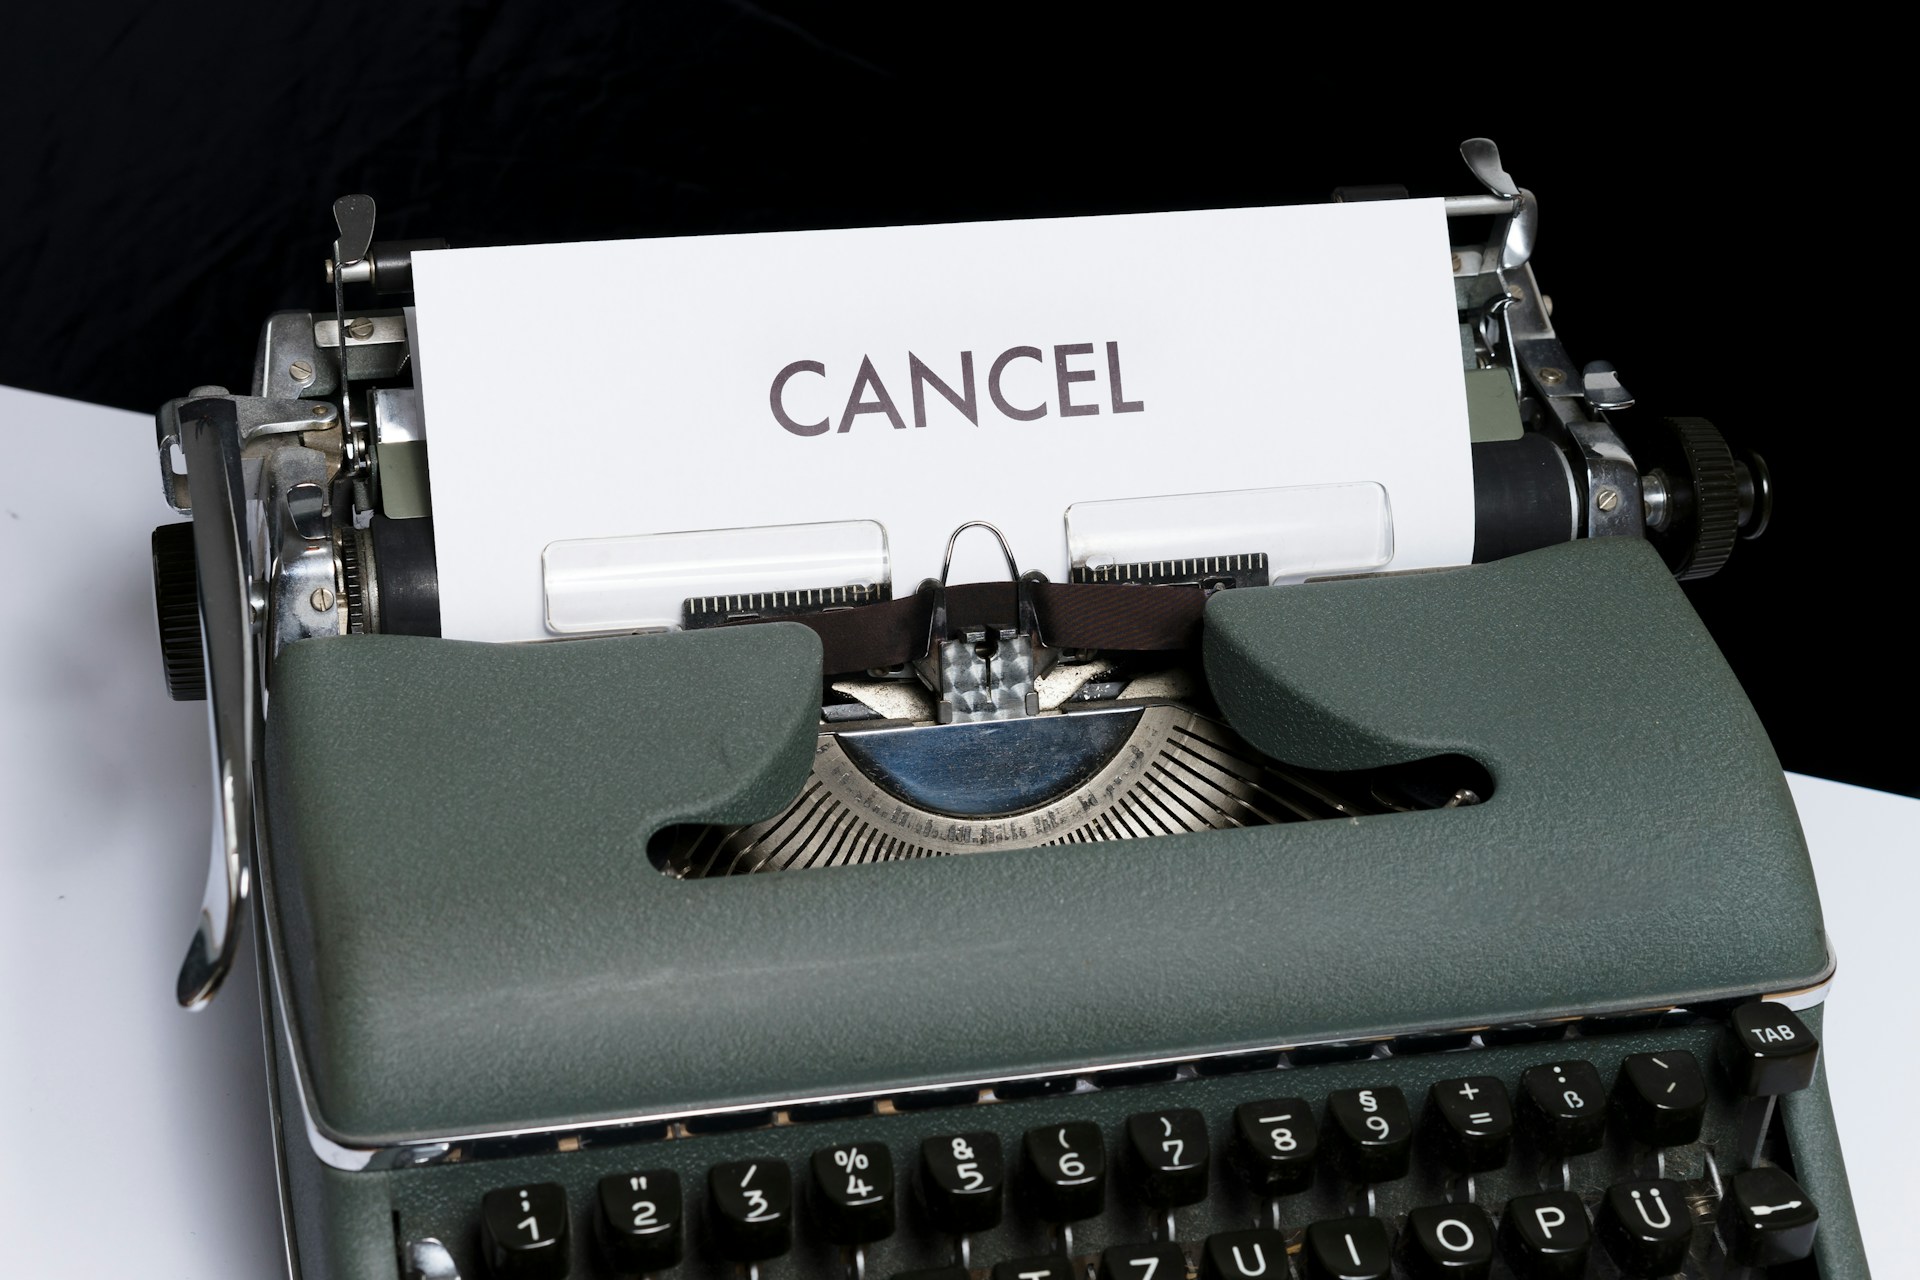 Image shows typewriter with "Cancel" typed on paper, demonstrating the desire you may have to remove your book from Amazon.